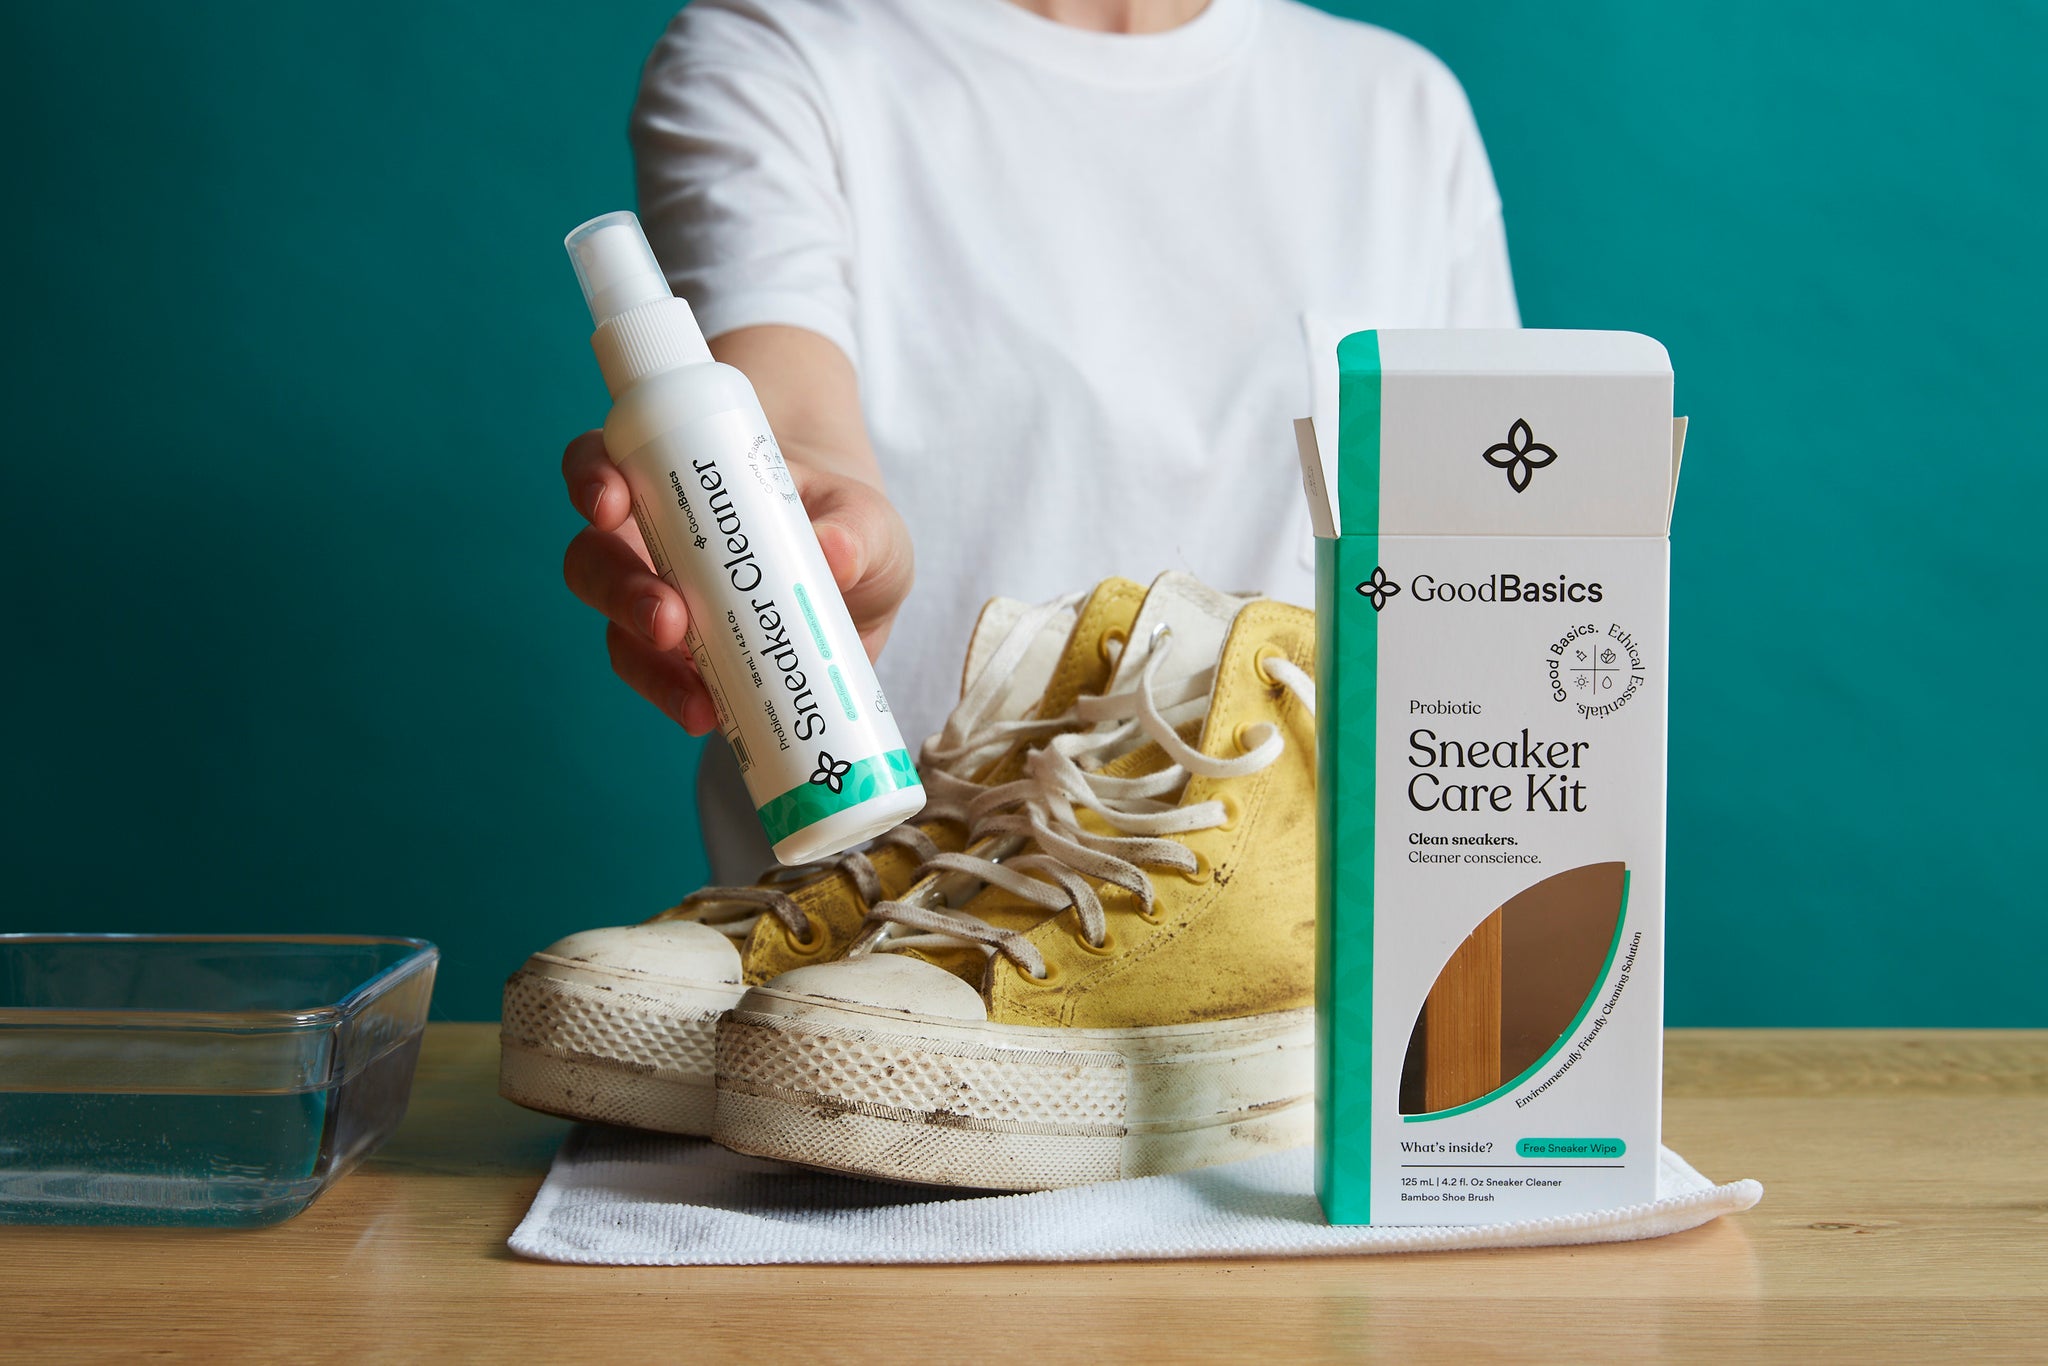 Toxin-free freshness: Introducing the GoodBasics Sneaker Care Kit